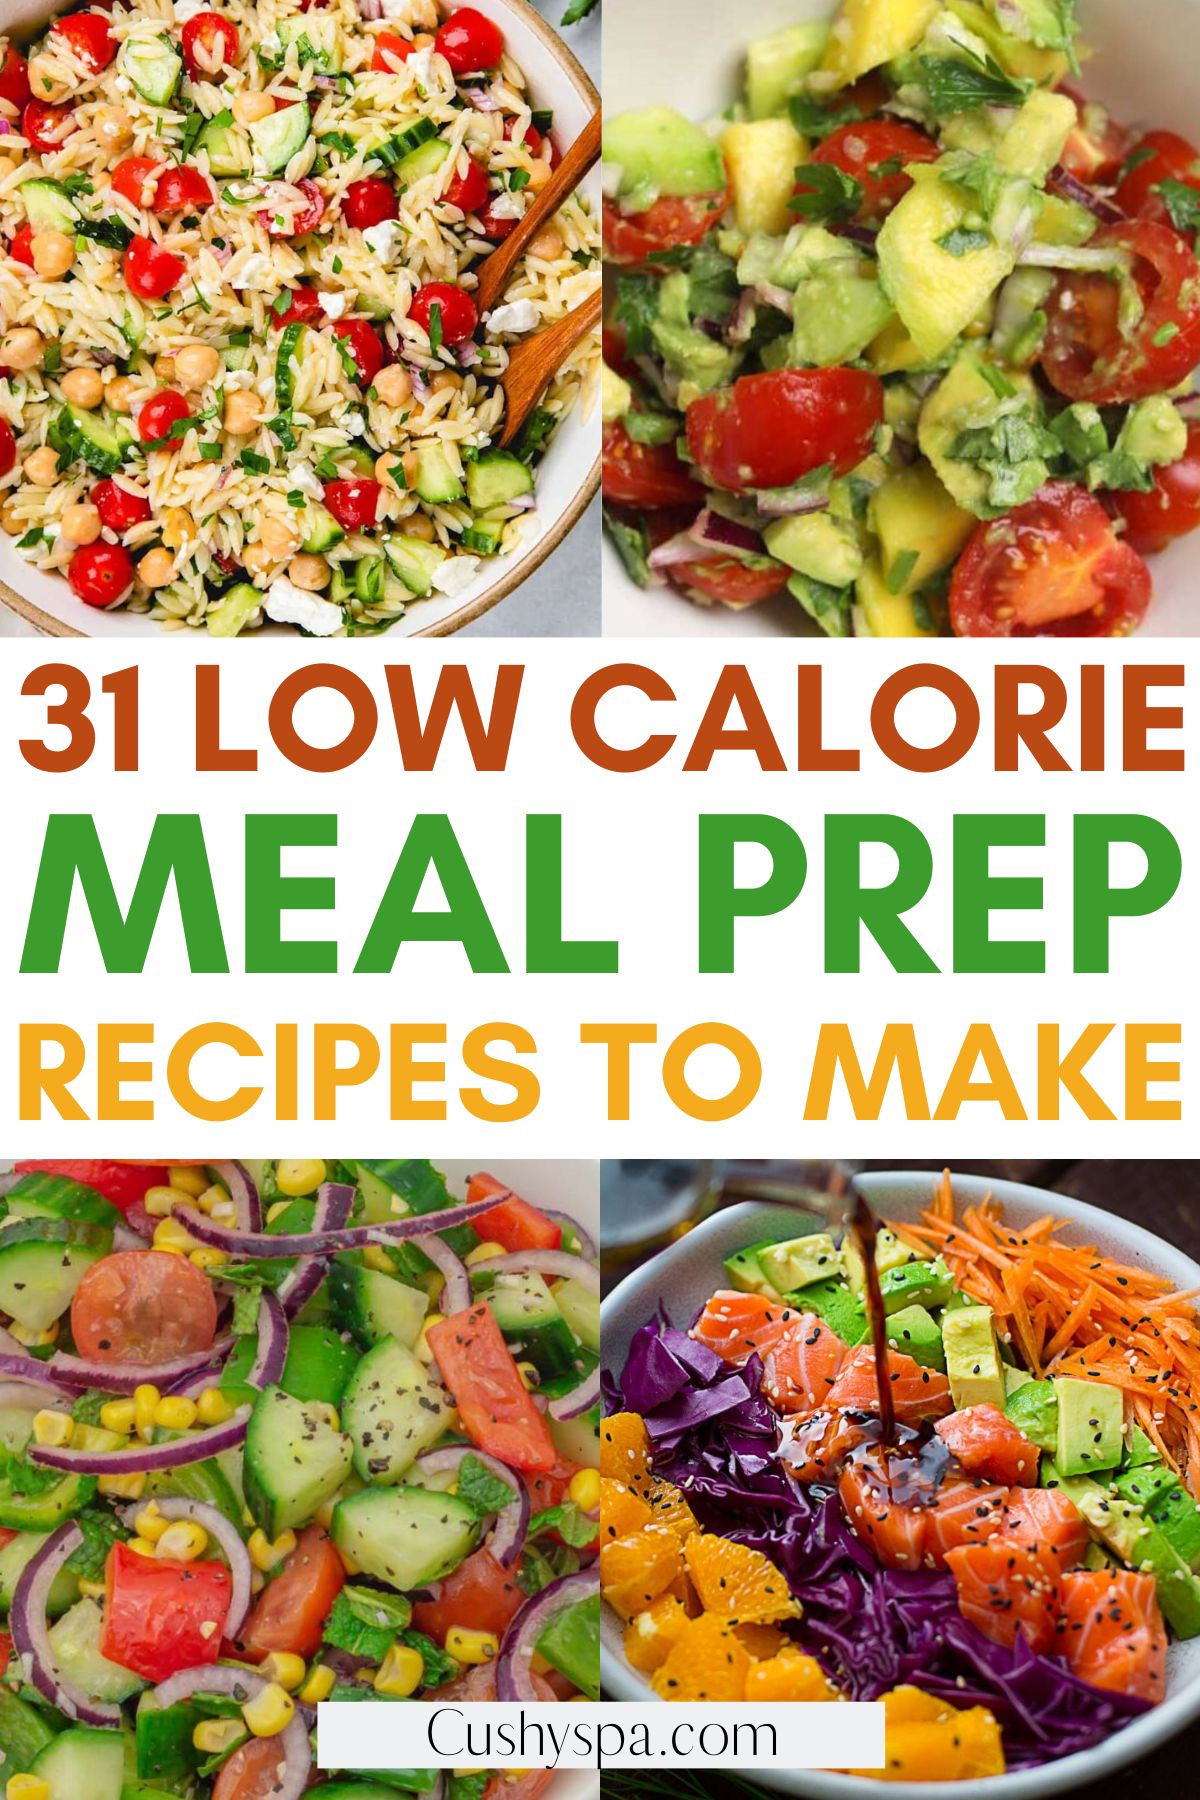 Low Calorie Meal Prep Recipes to make